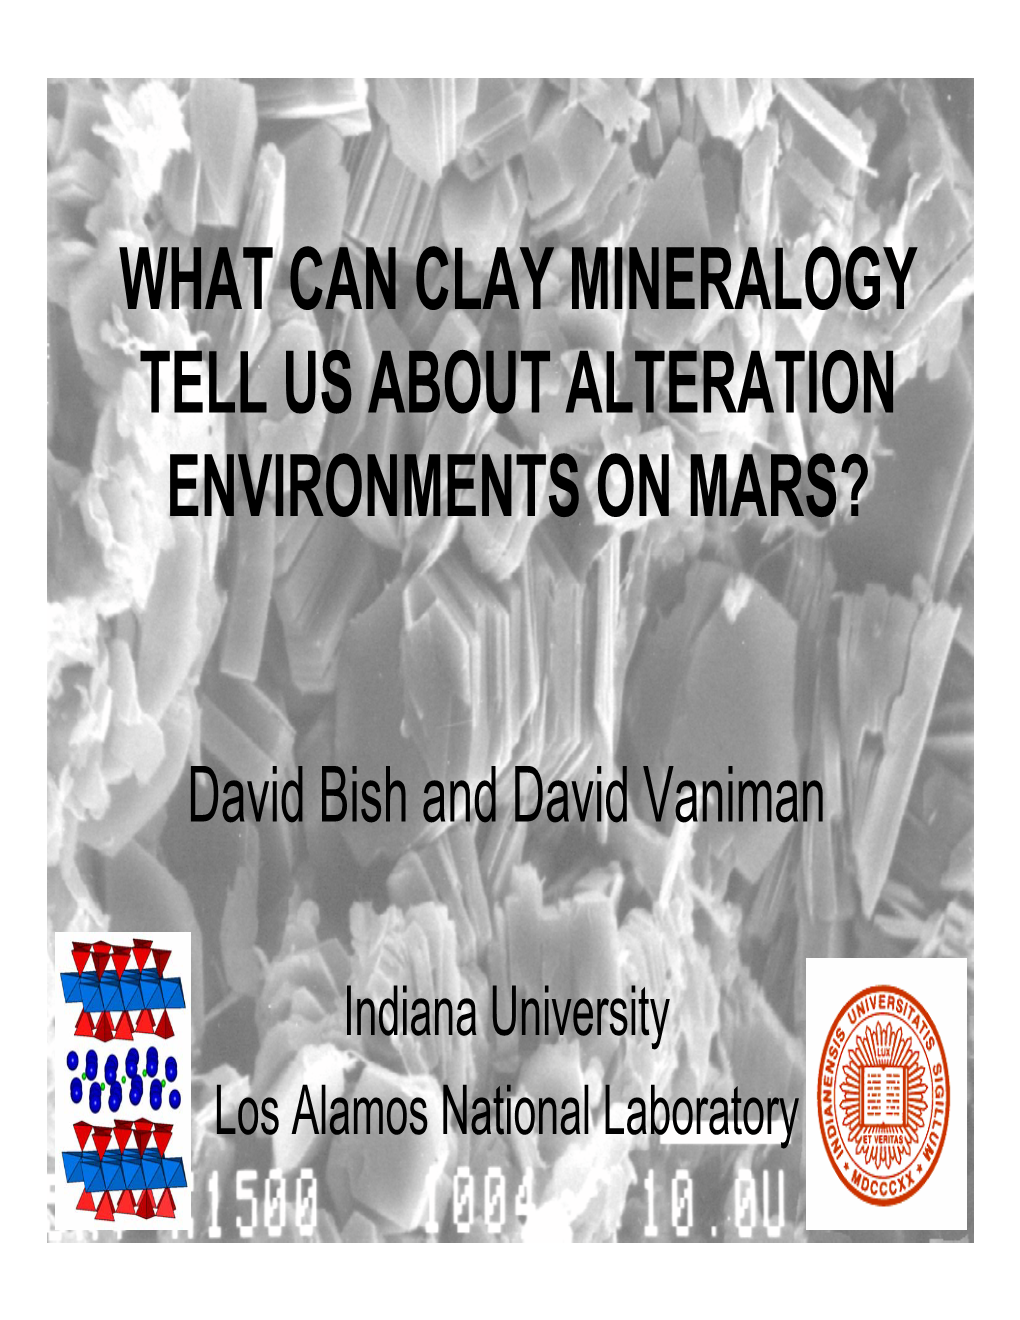 What Can Clay Mineralogy Tell Us About Alteration Environments on Mars?